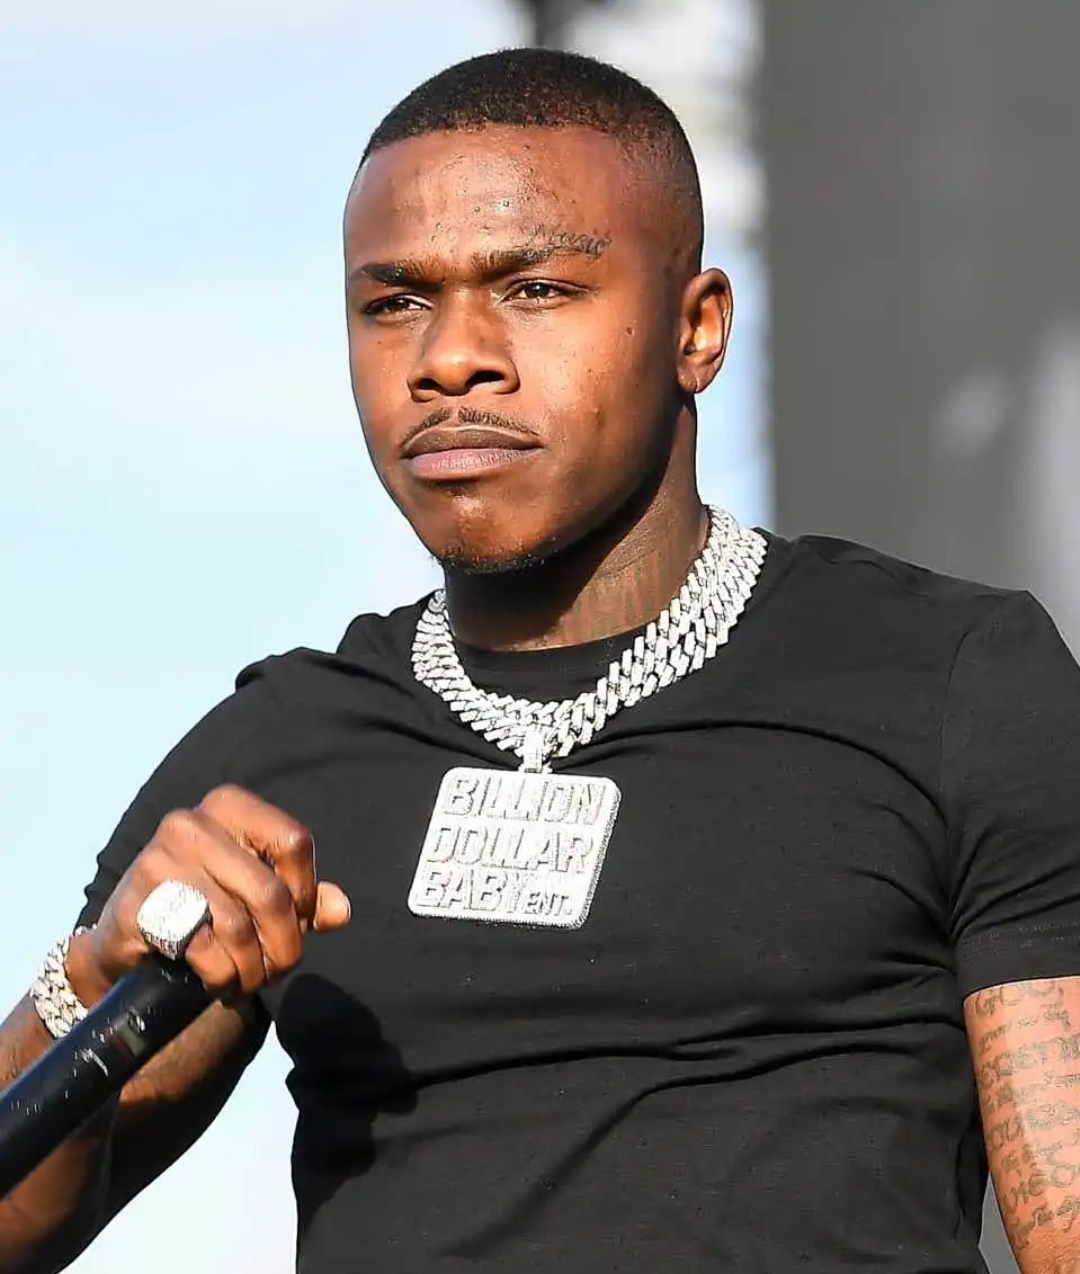 i met dababy at school. he said he's dababy and was wearing dababy clothes.  i think